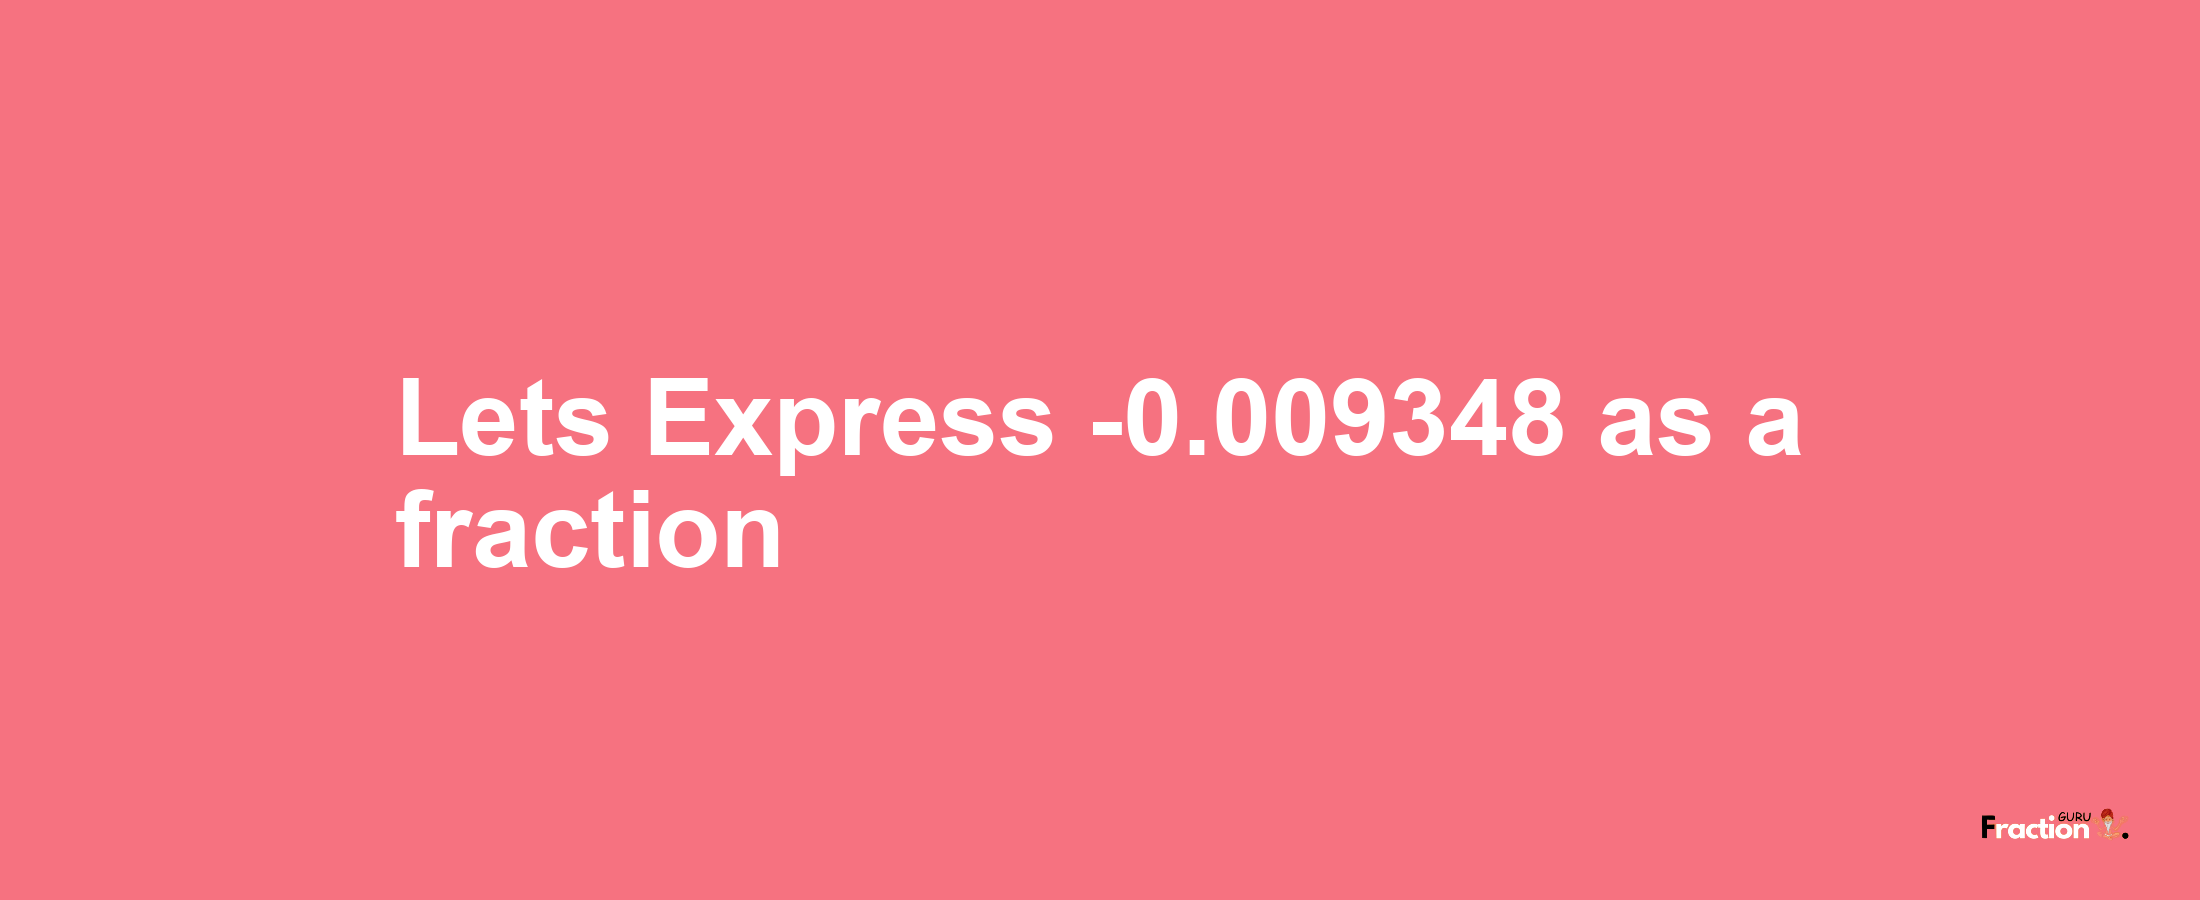 Lets Express -0.009348 as afraction